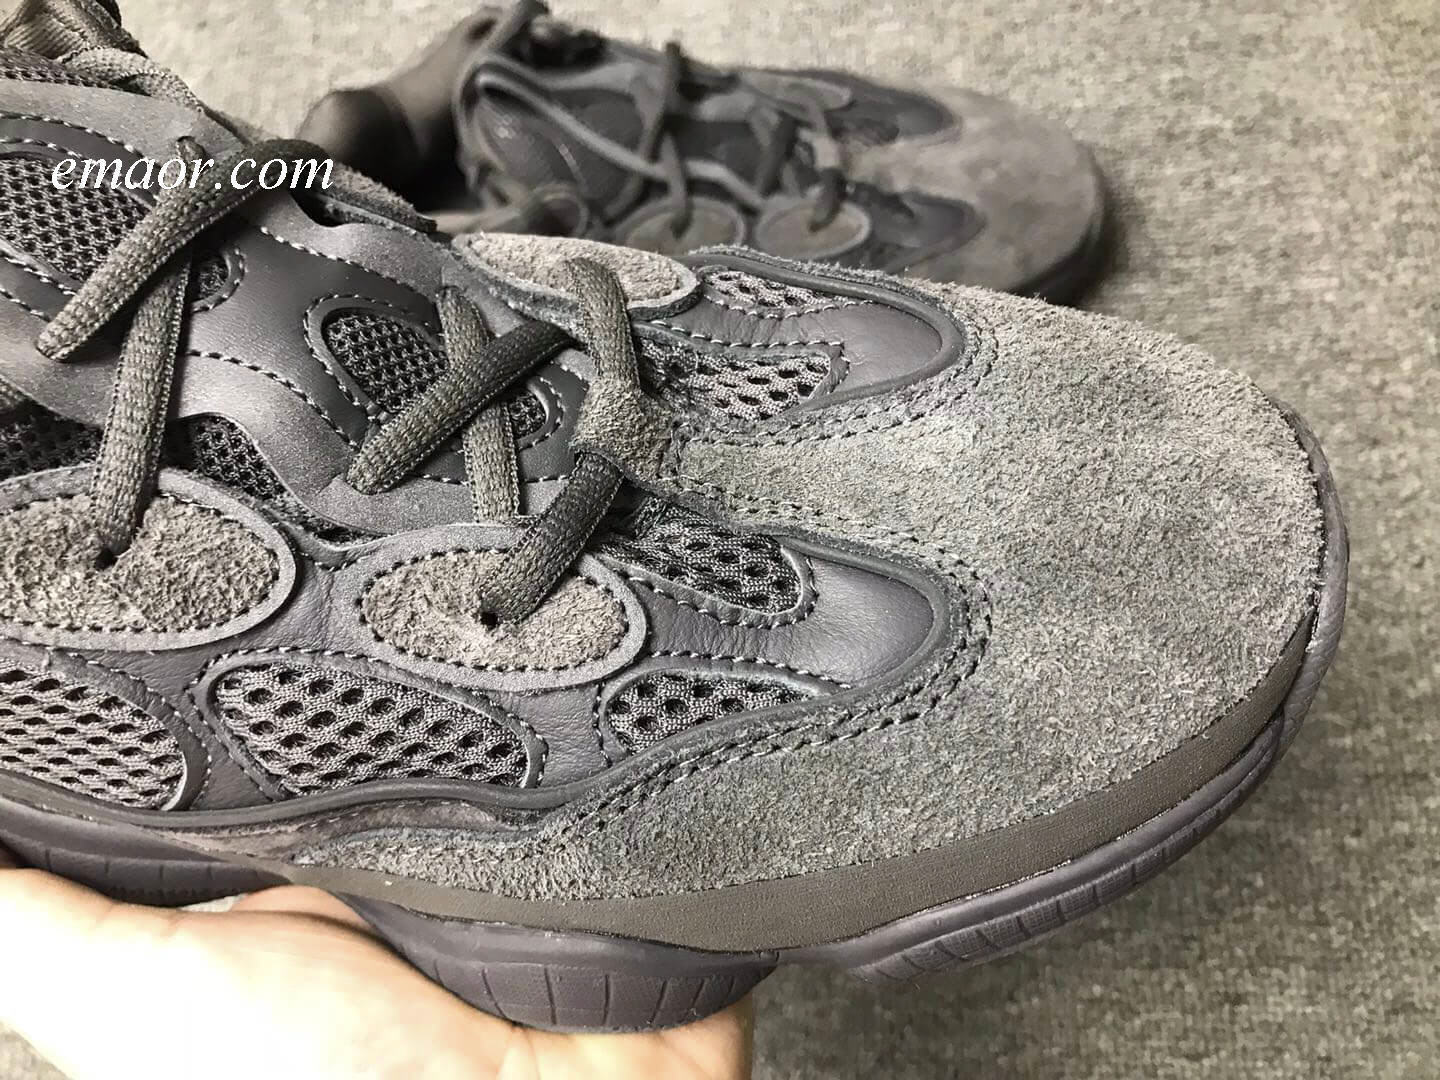 Yeezy 500 Salt New Releases Hiking Shoes Men's Mesh Summer Boost 350 Sneakers Roshing Runner Outdoors Sports Gym Boy Trainers Yeezy 500 Salt 